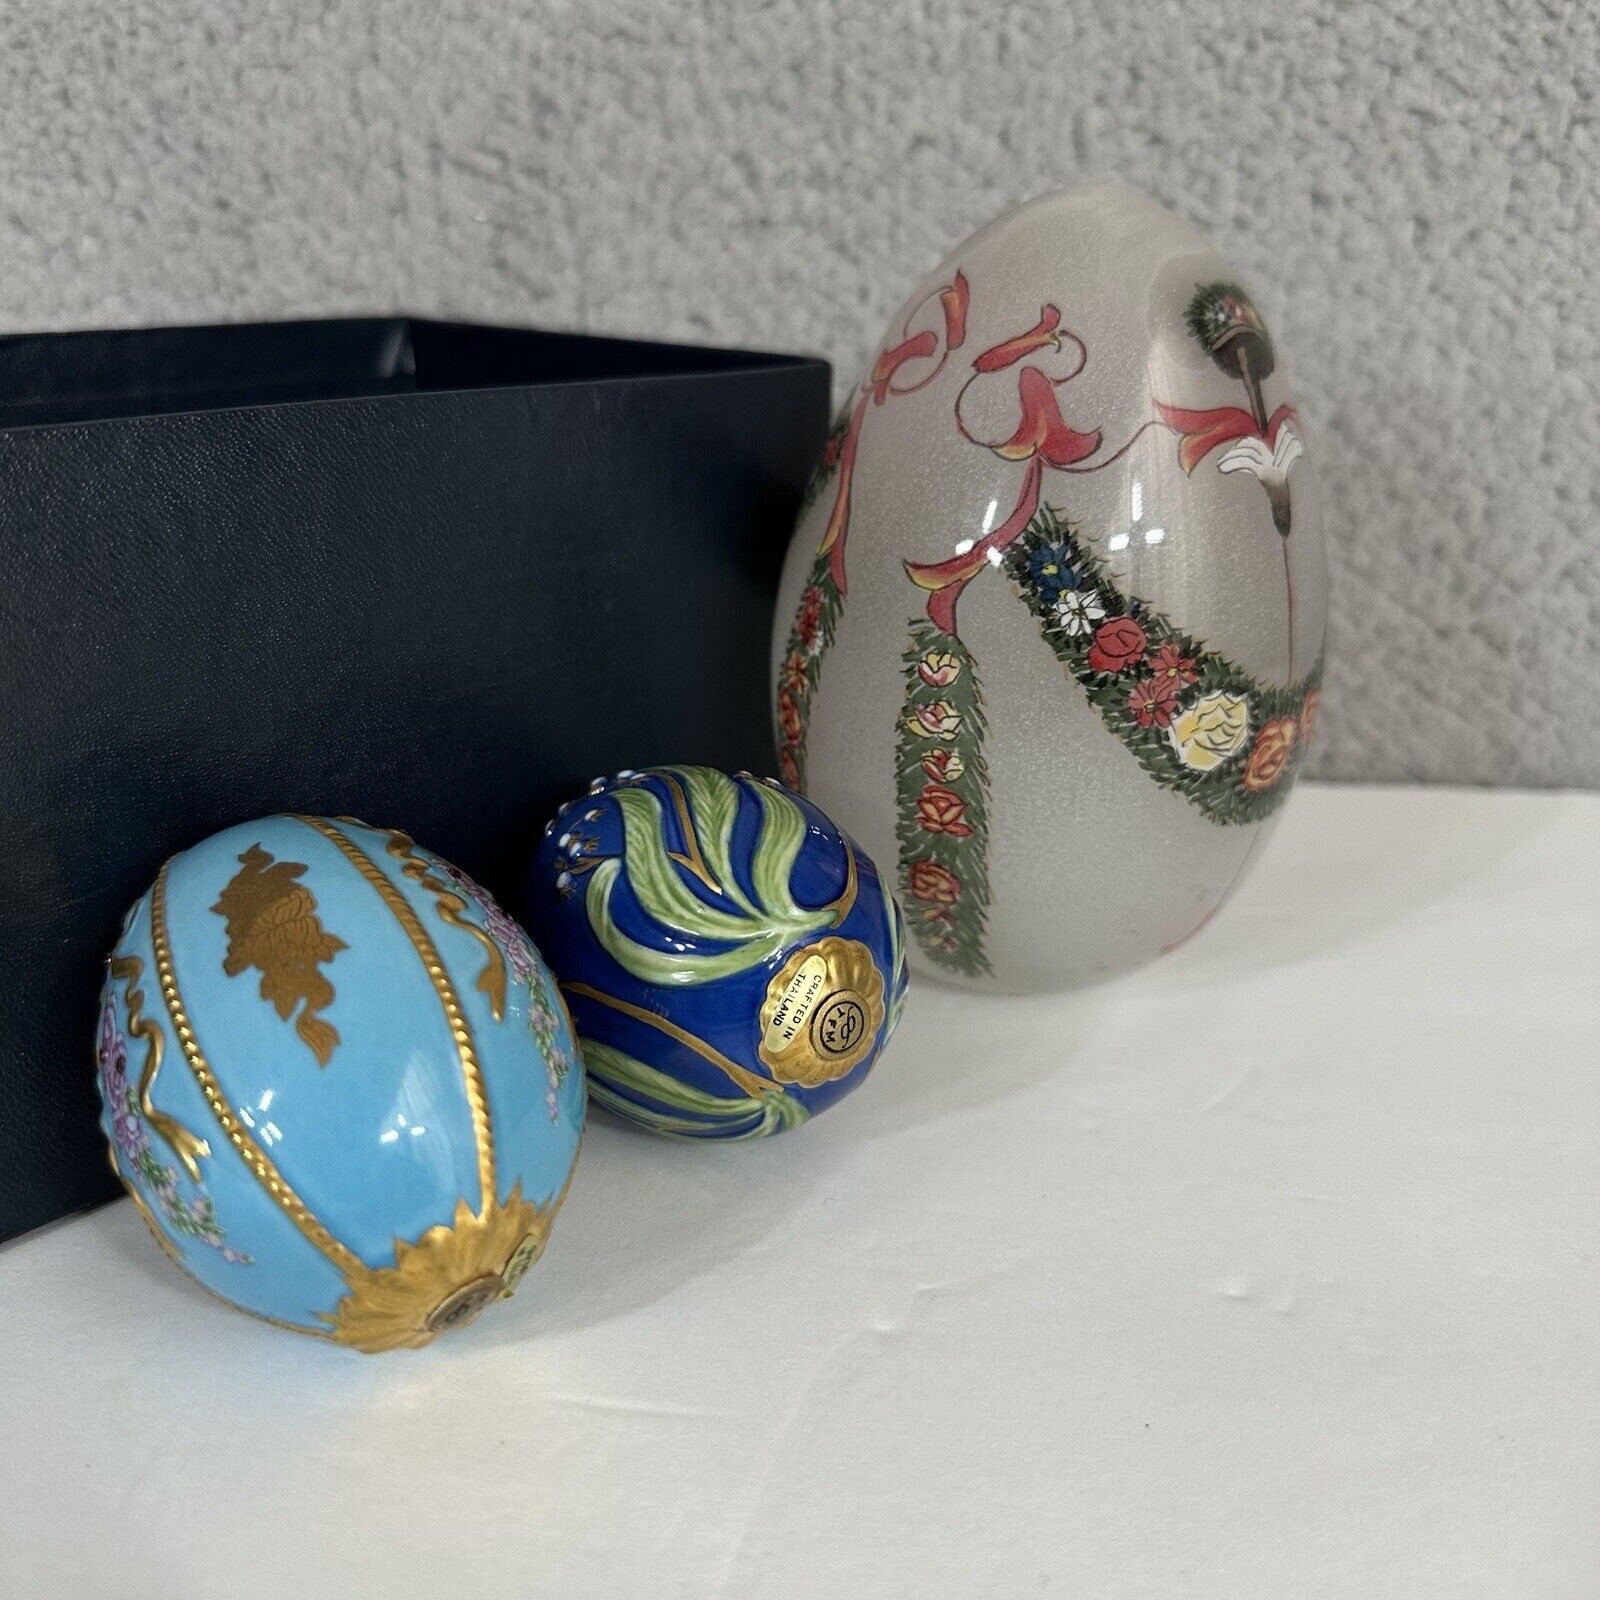 Franklin Mint Faberge Imperial Jeweled Decorative Eggs Lot of 2